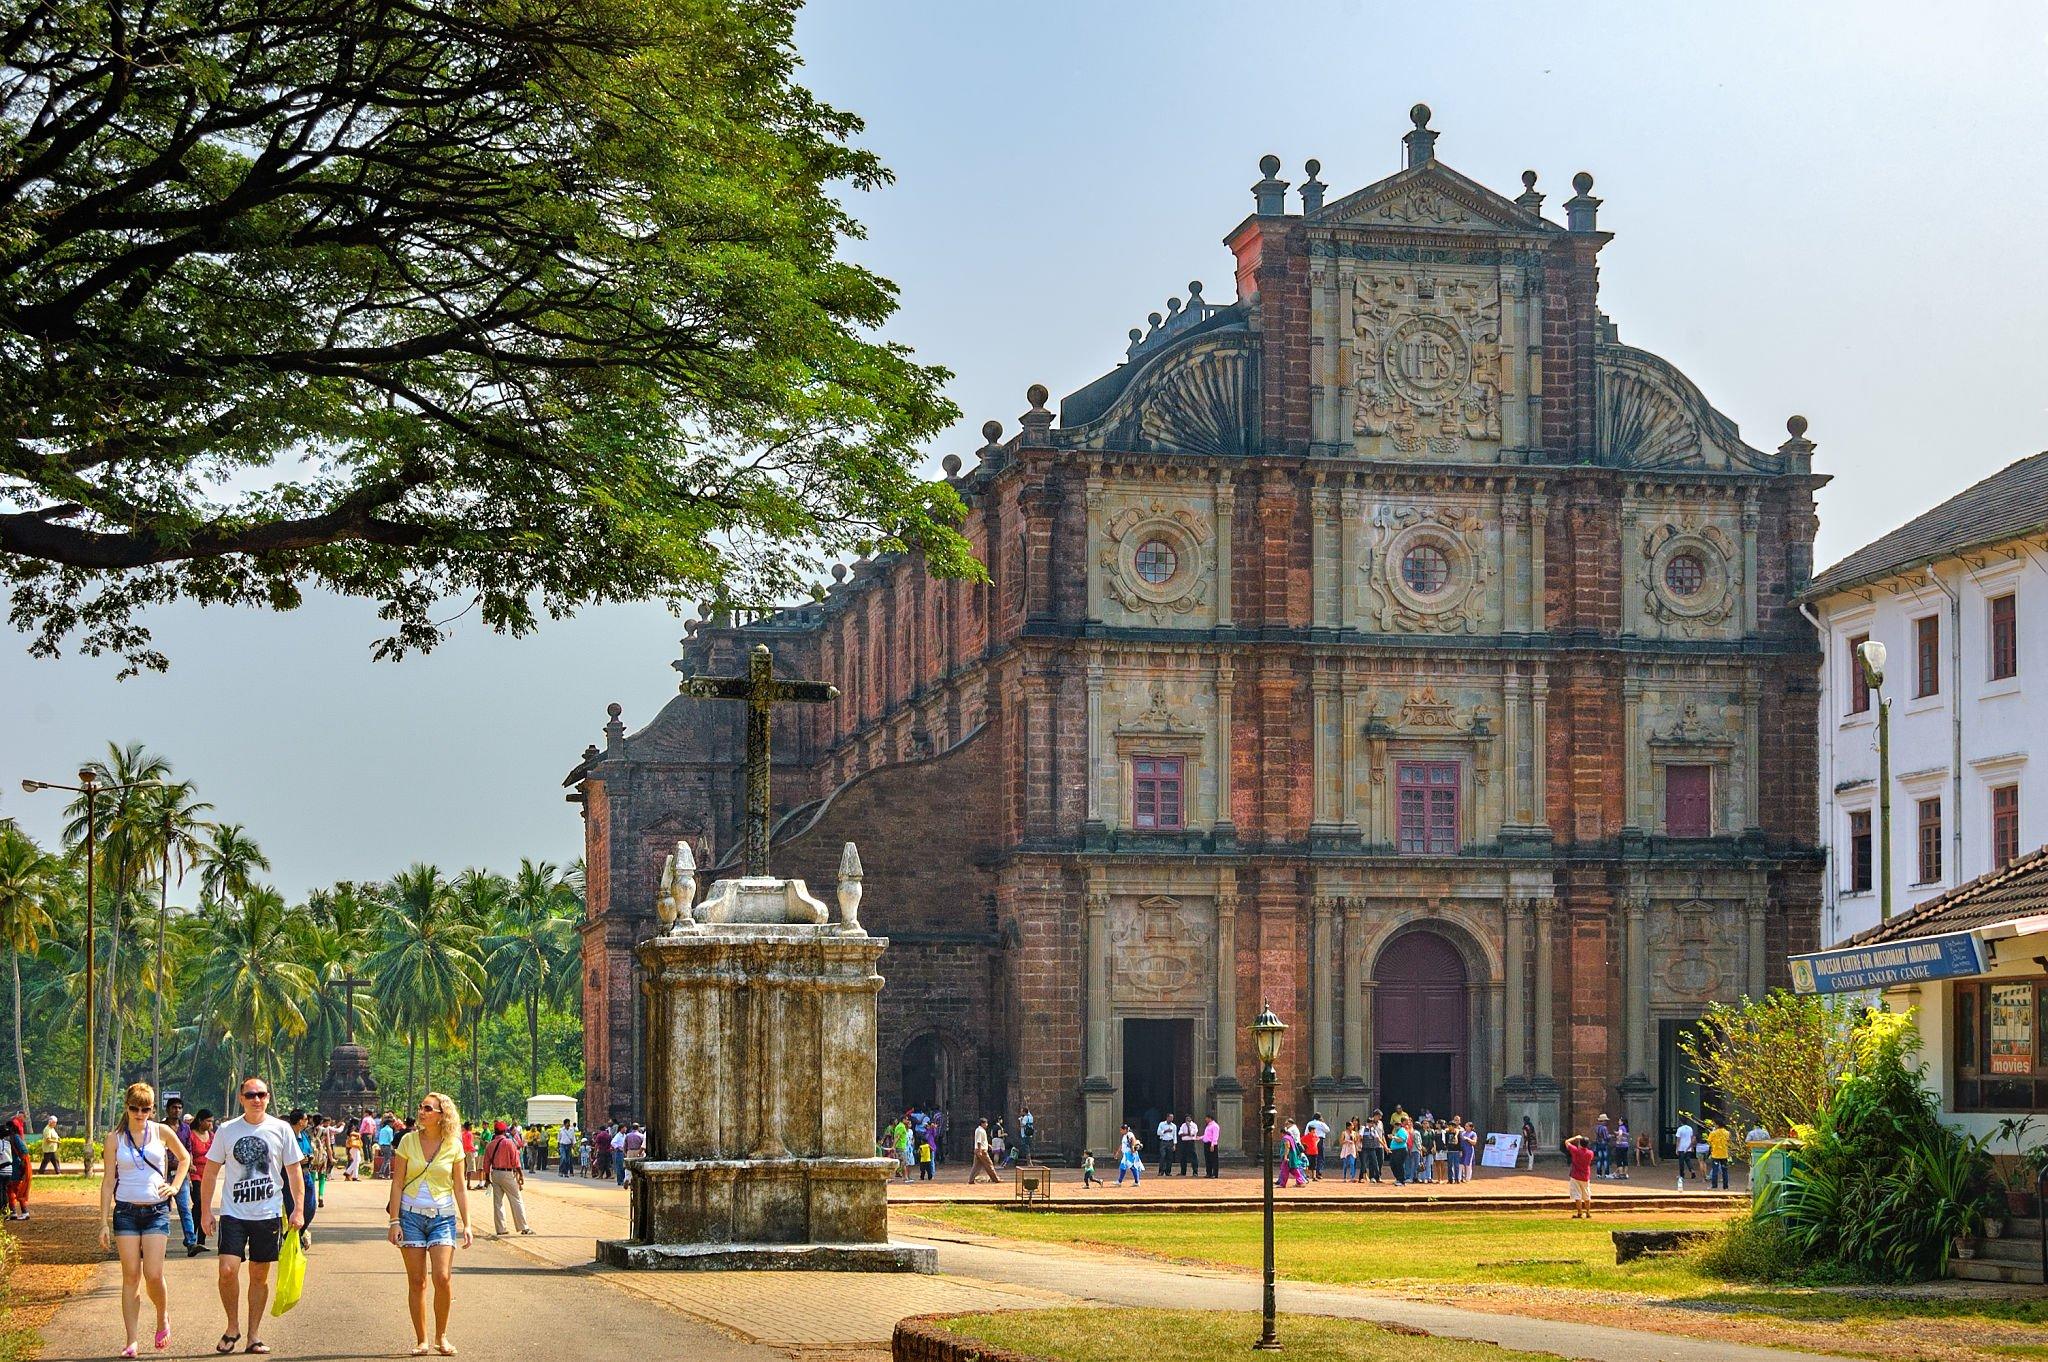 Yangon Day Tours: Perfect Holiday Destination to Spend with Family & Kids